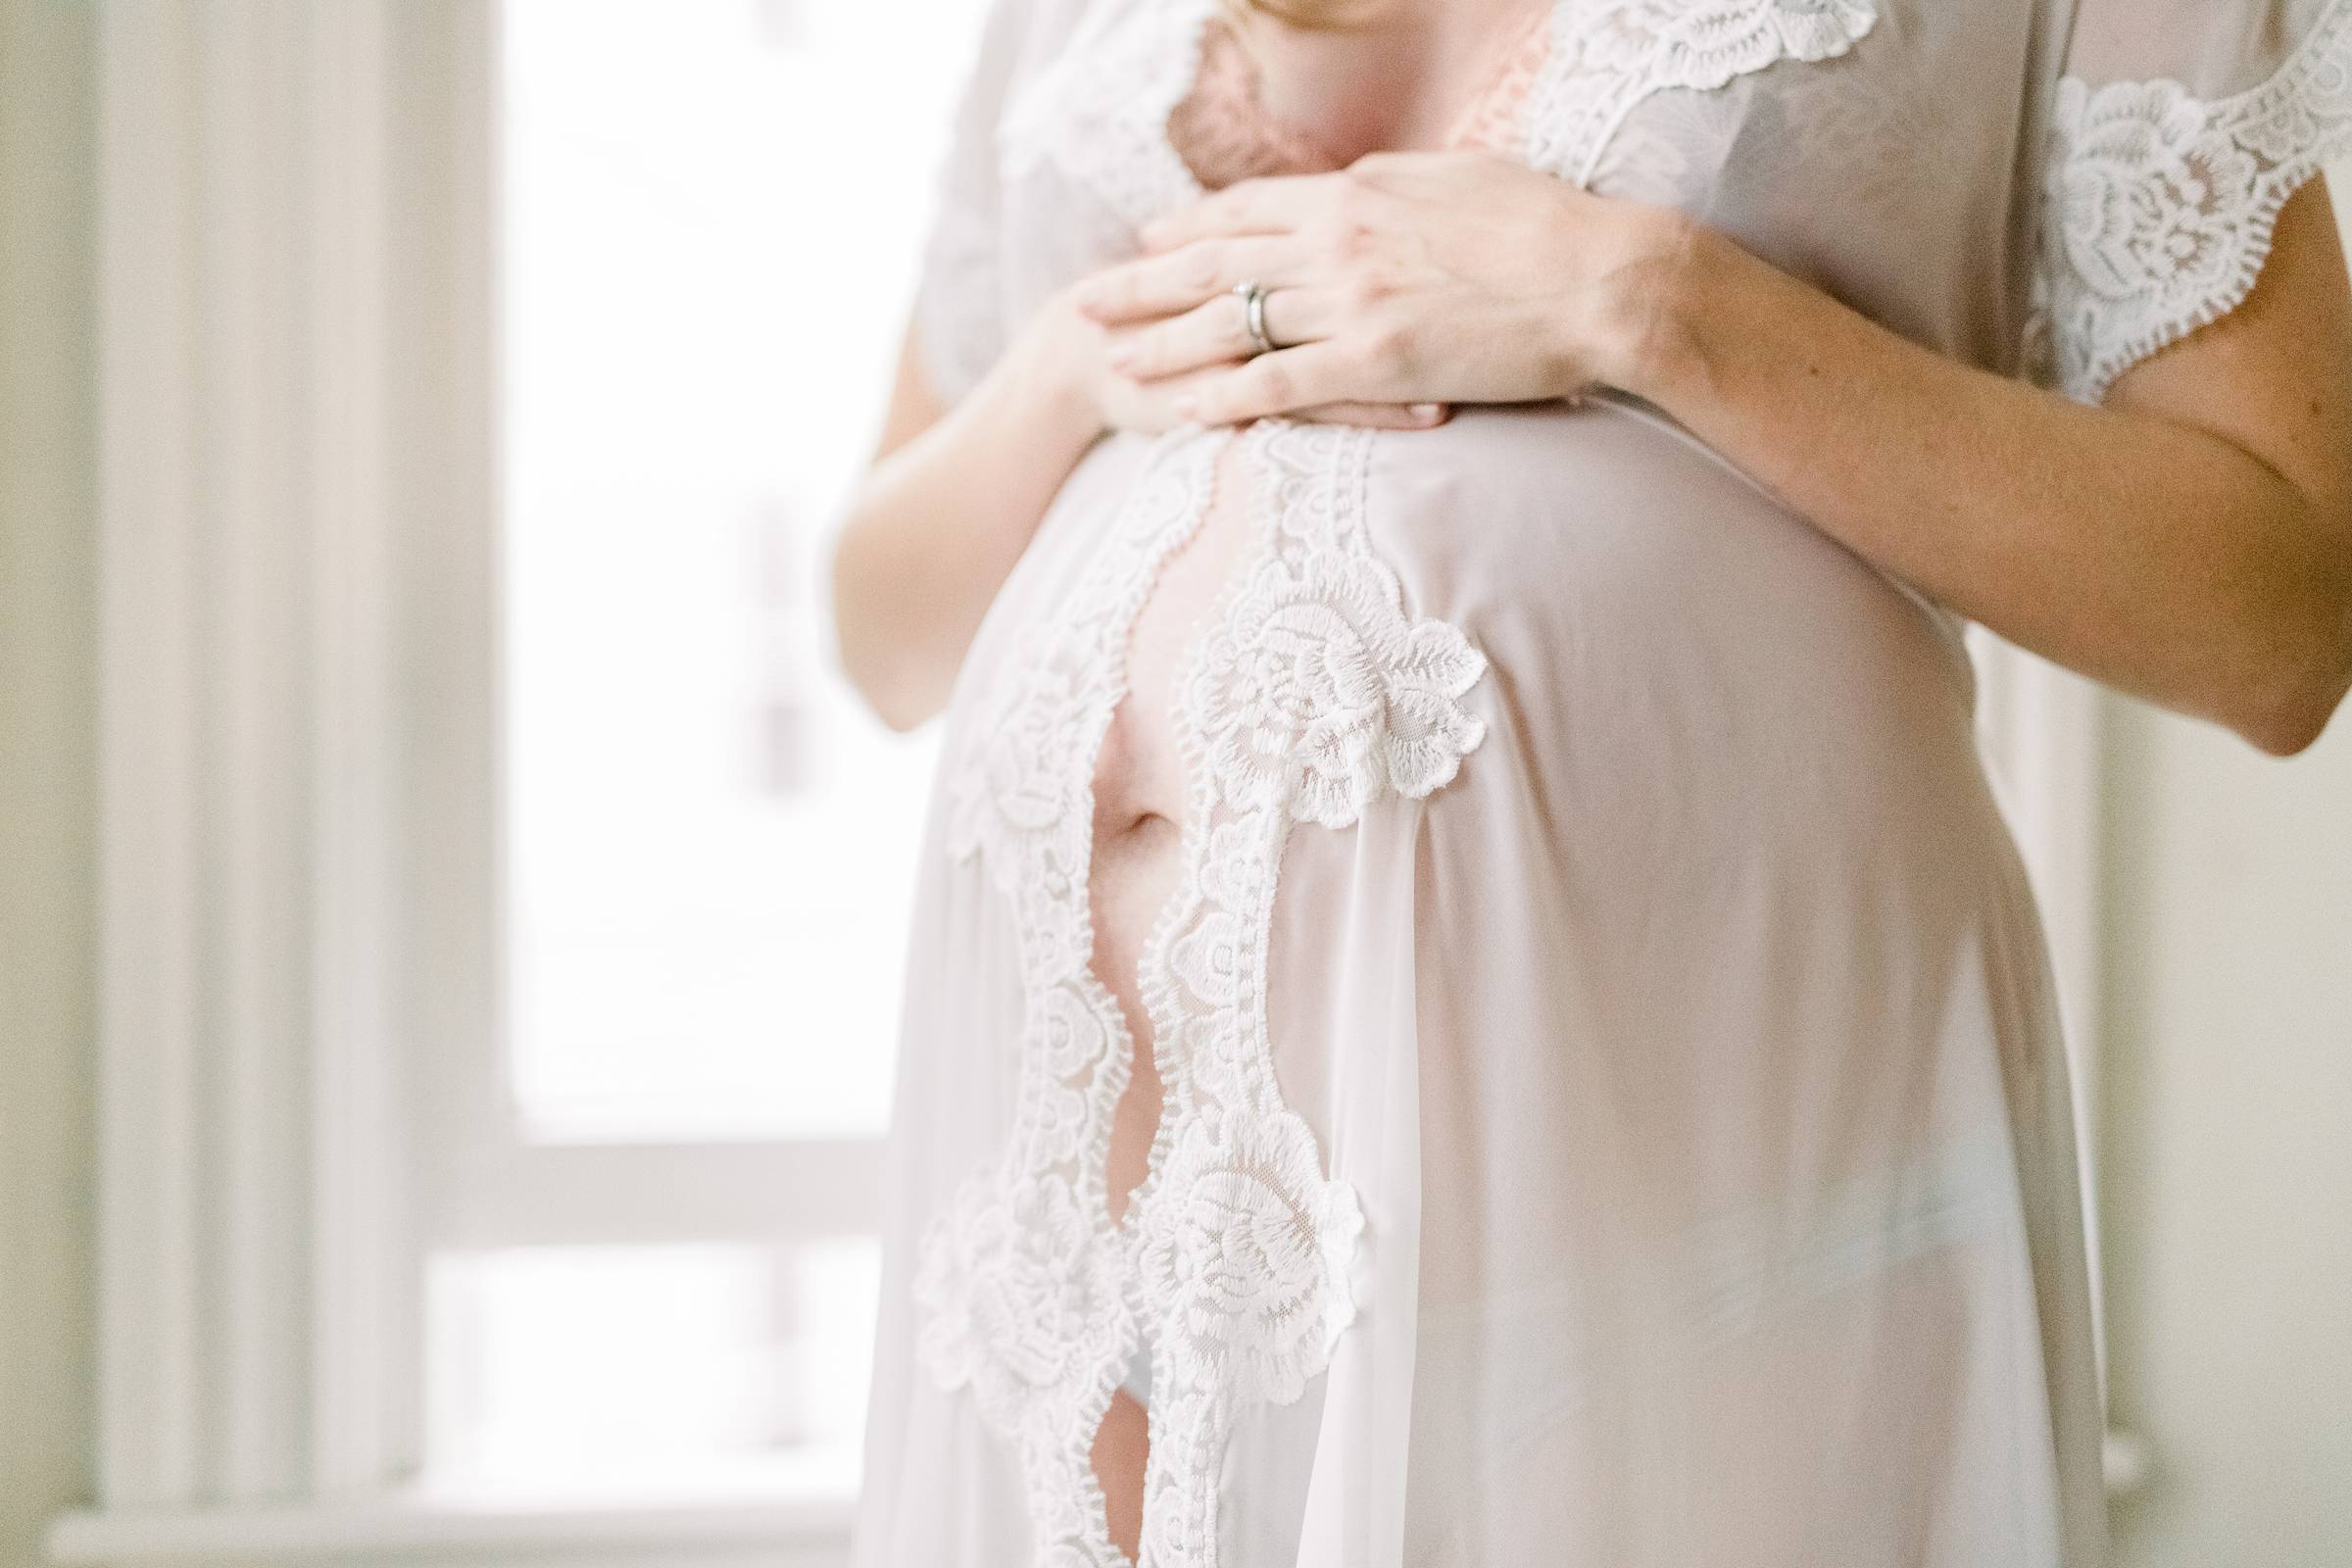 Pregnant woman in sheer robe with hands resting on her belly